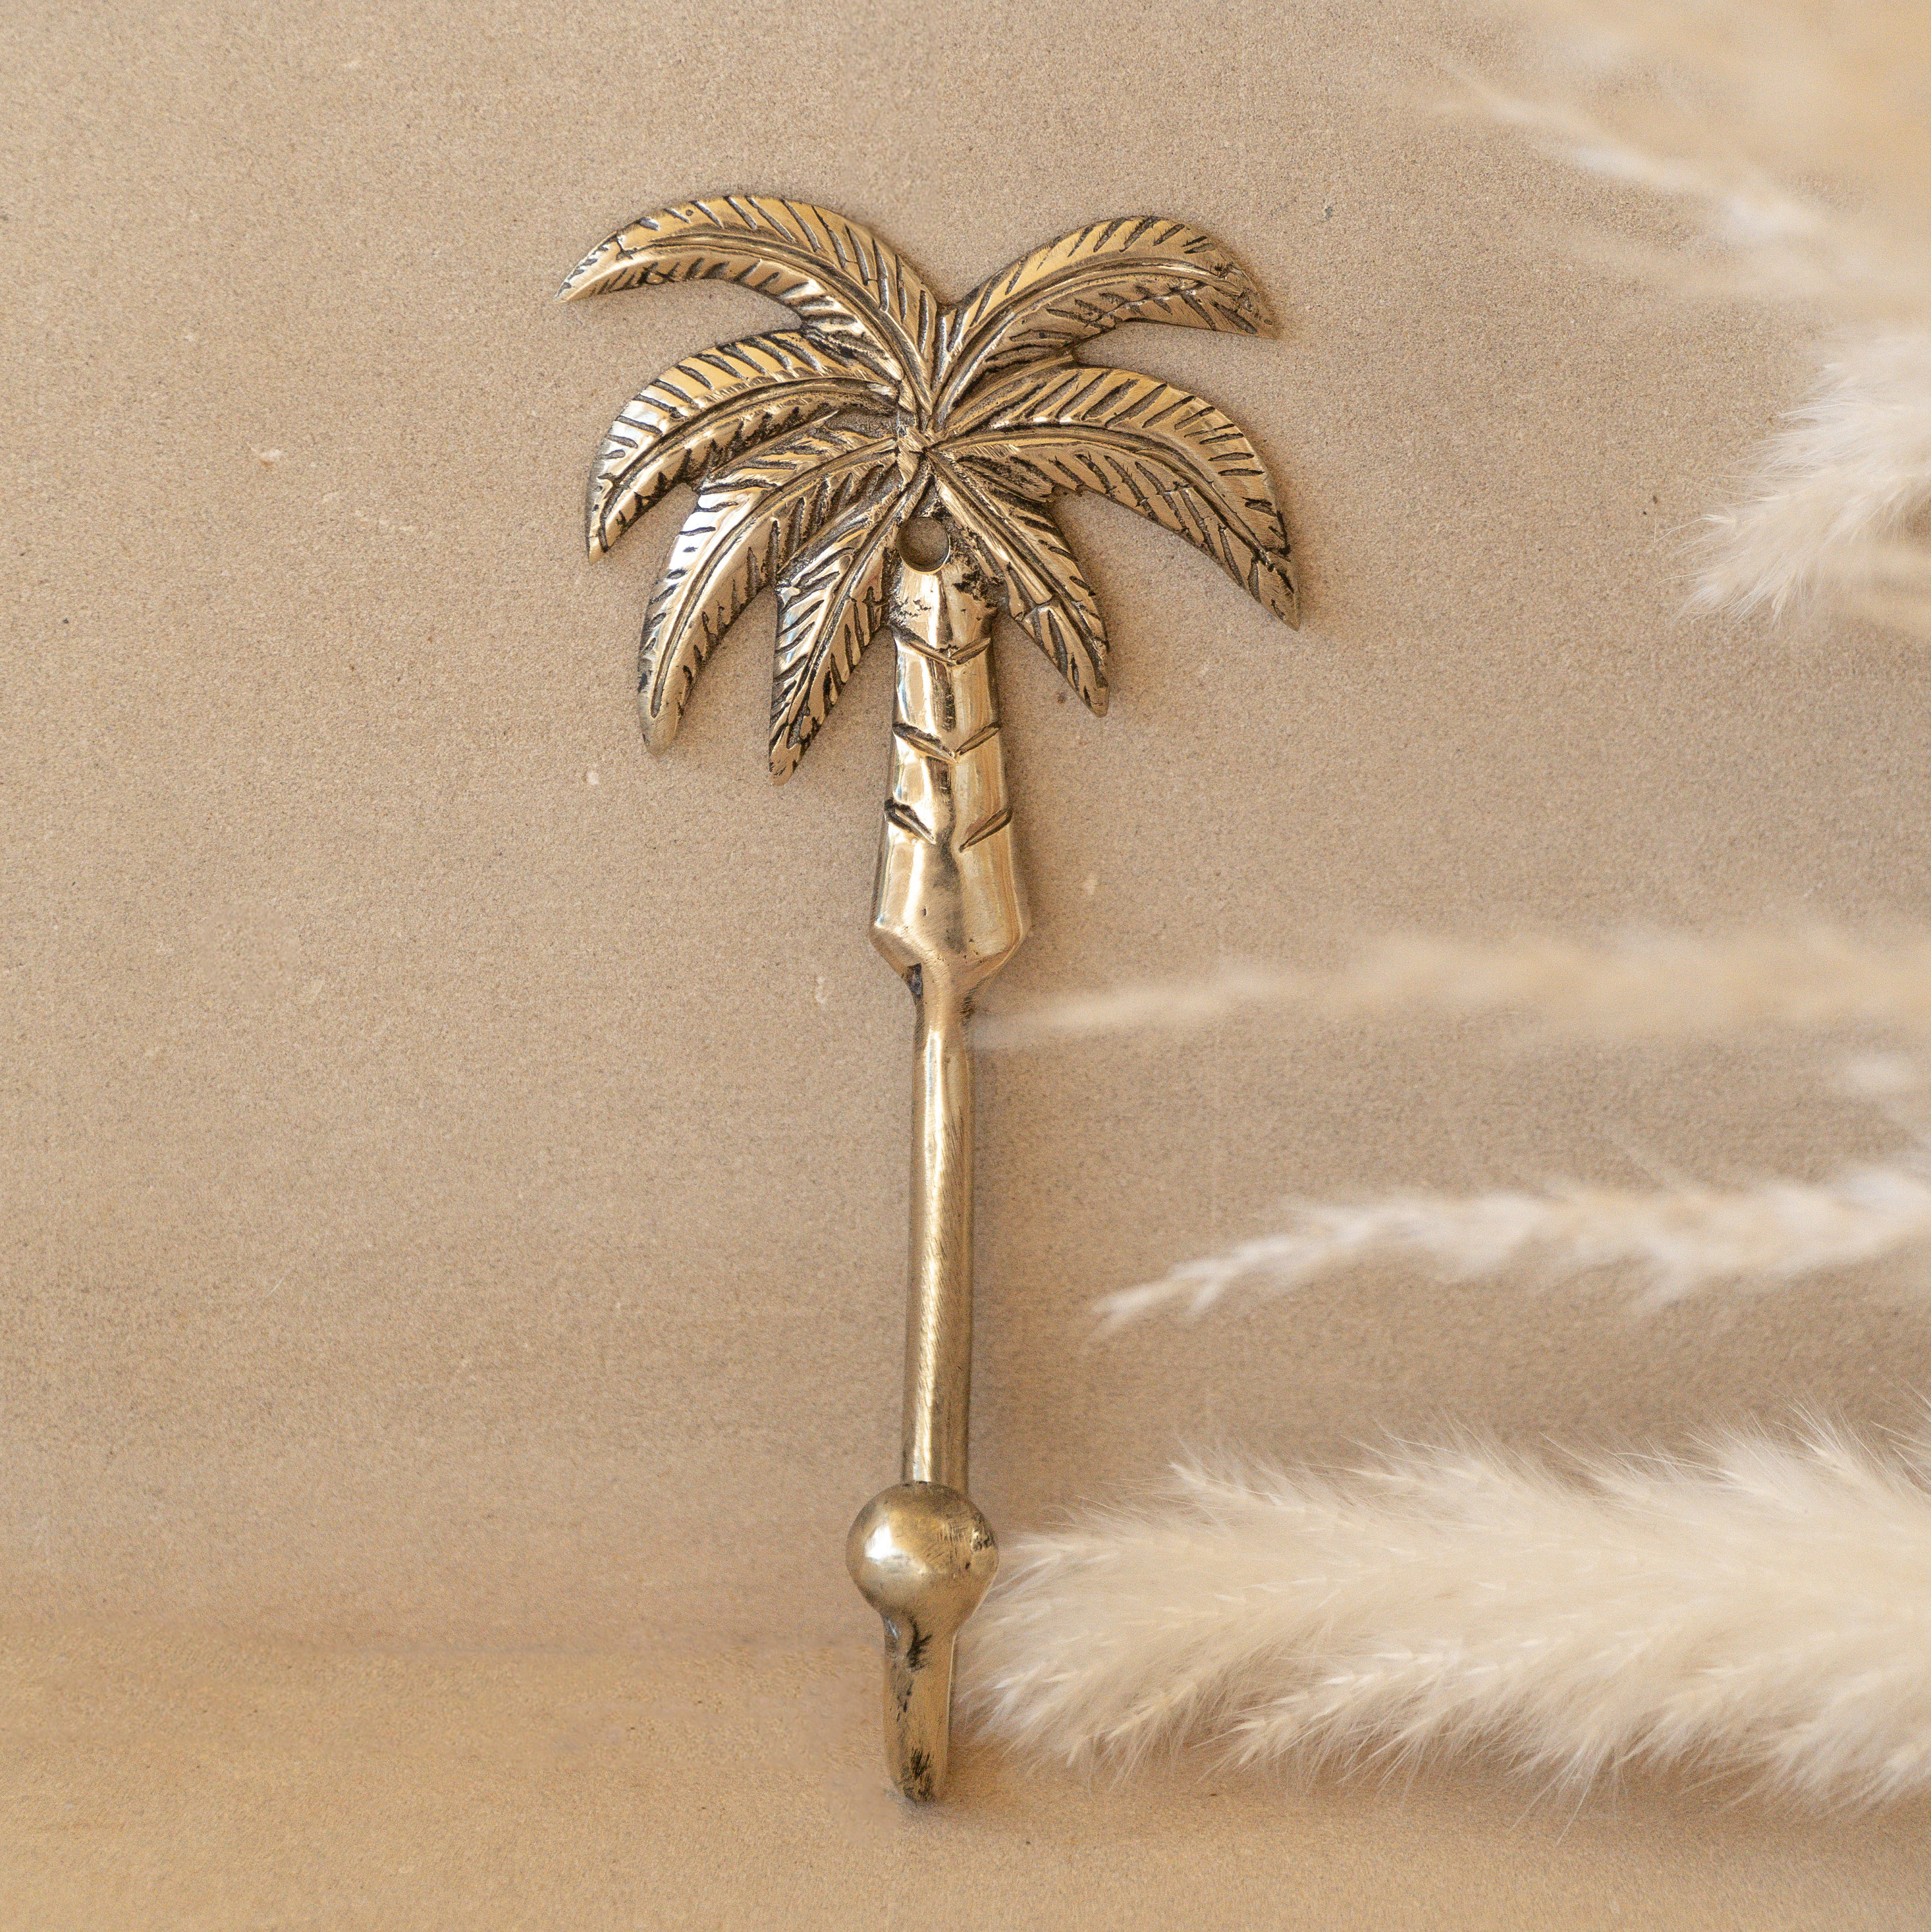 Whole gold palm tree decor Can Make Any Space Beautiful and Vibrant 